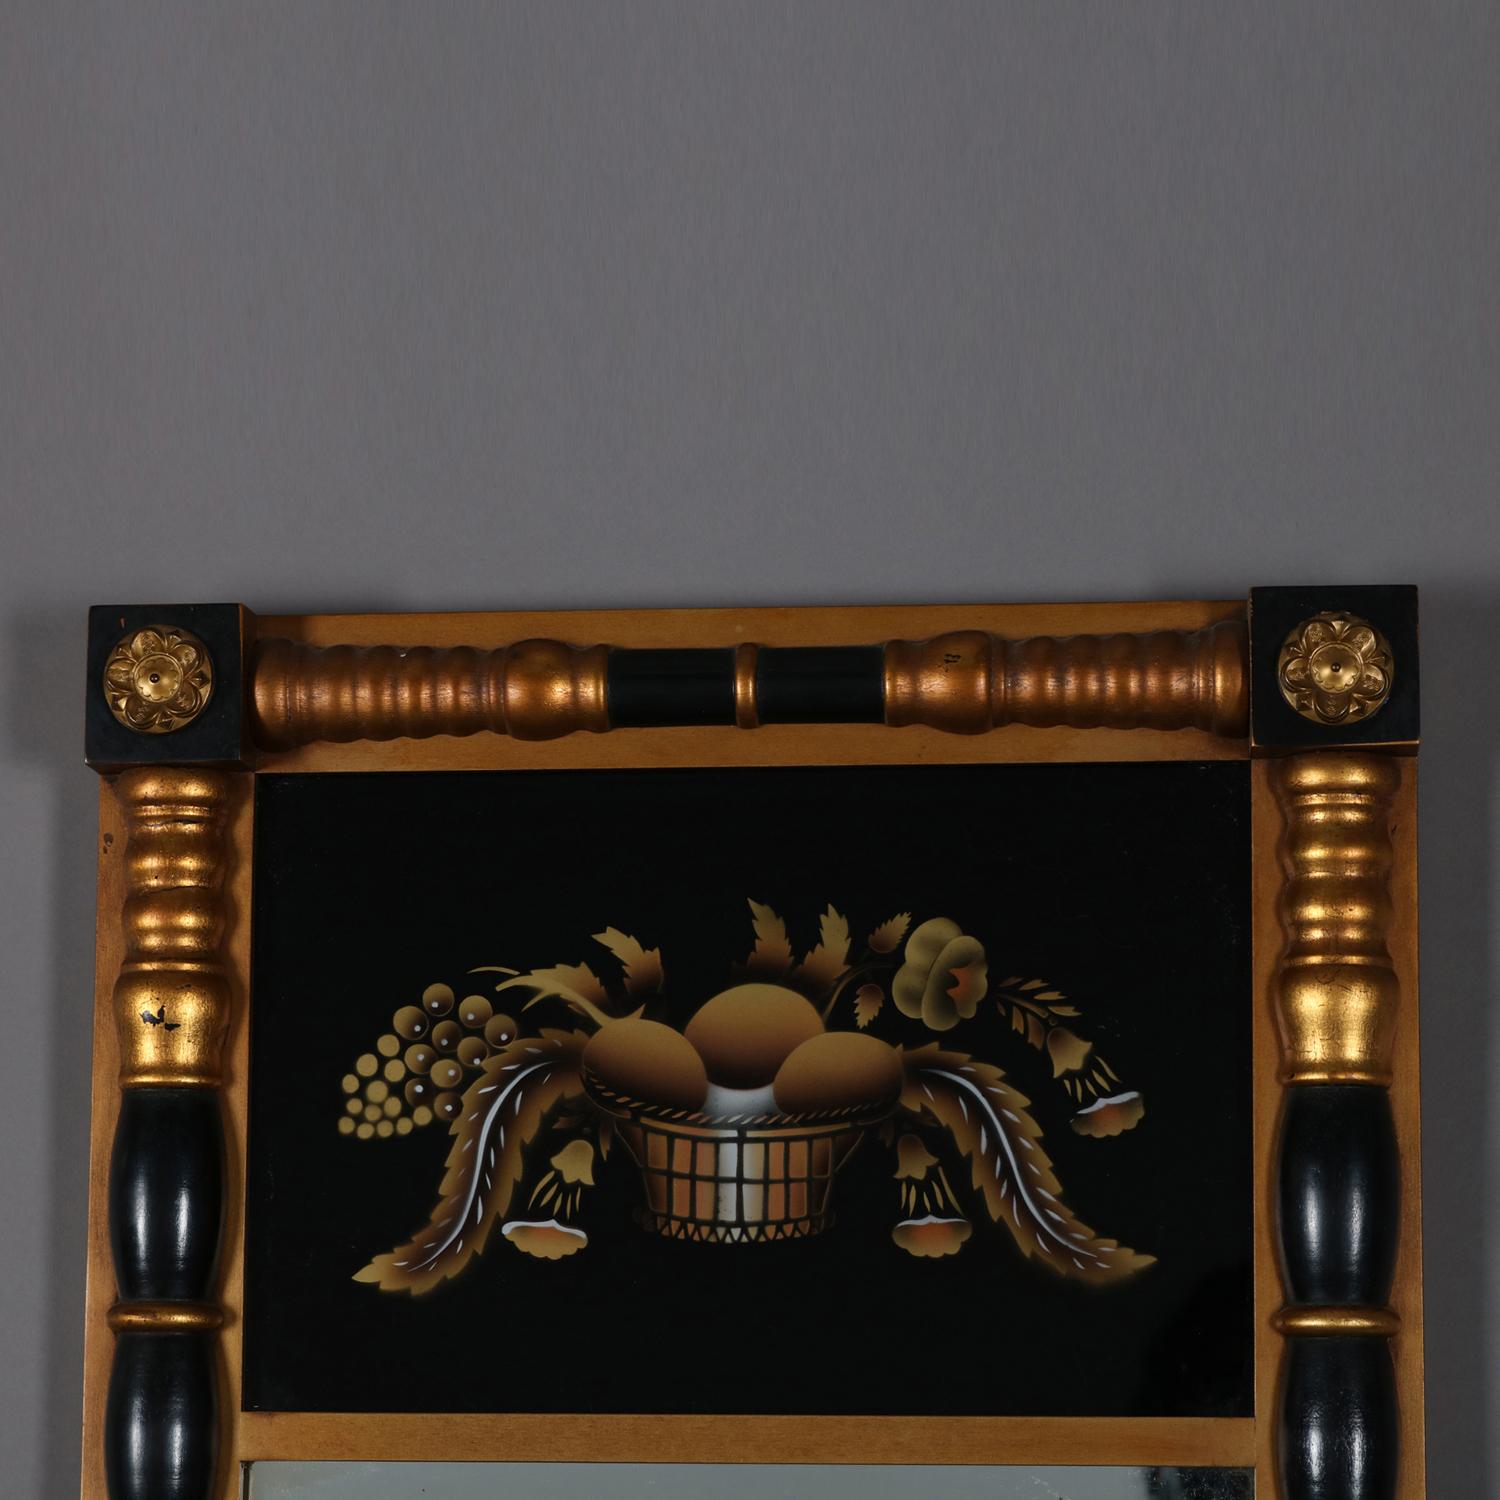 Trumeau wall mirror by Lambert Hitchcock features ebonized and giltwood column form frame with rosette die joints, upper panel with Eglomise still fruit still life, en verso original label, 20th century

***DELIVERY NOTICE – Due to COVID-19 we are